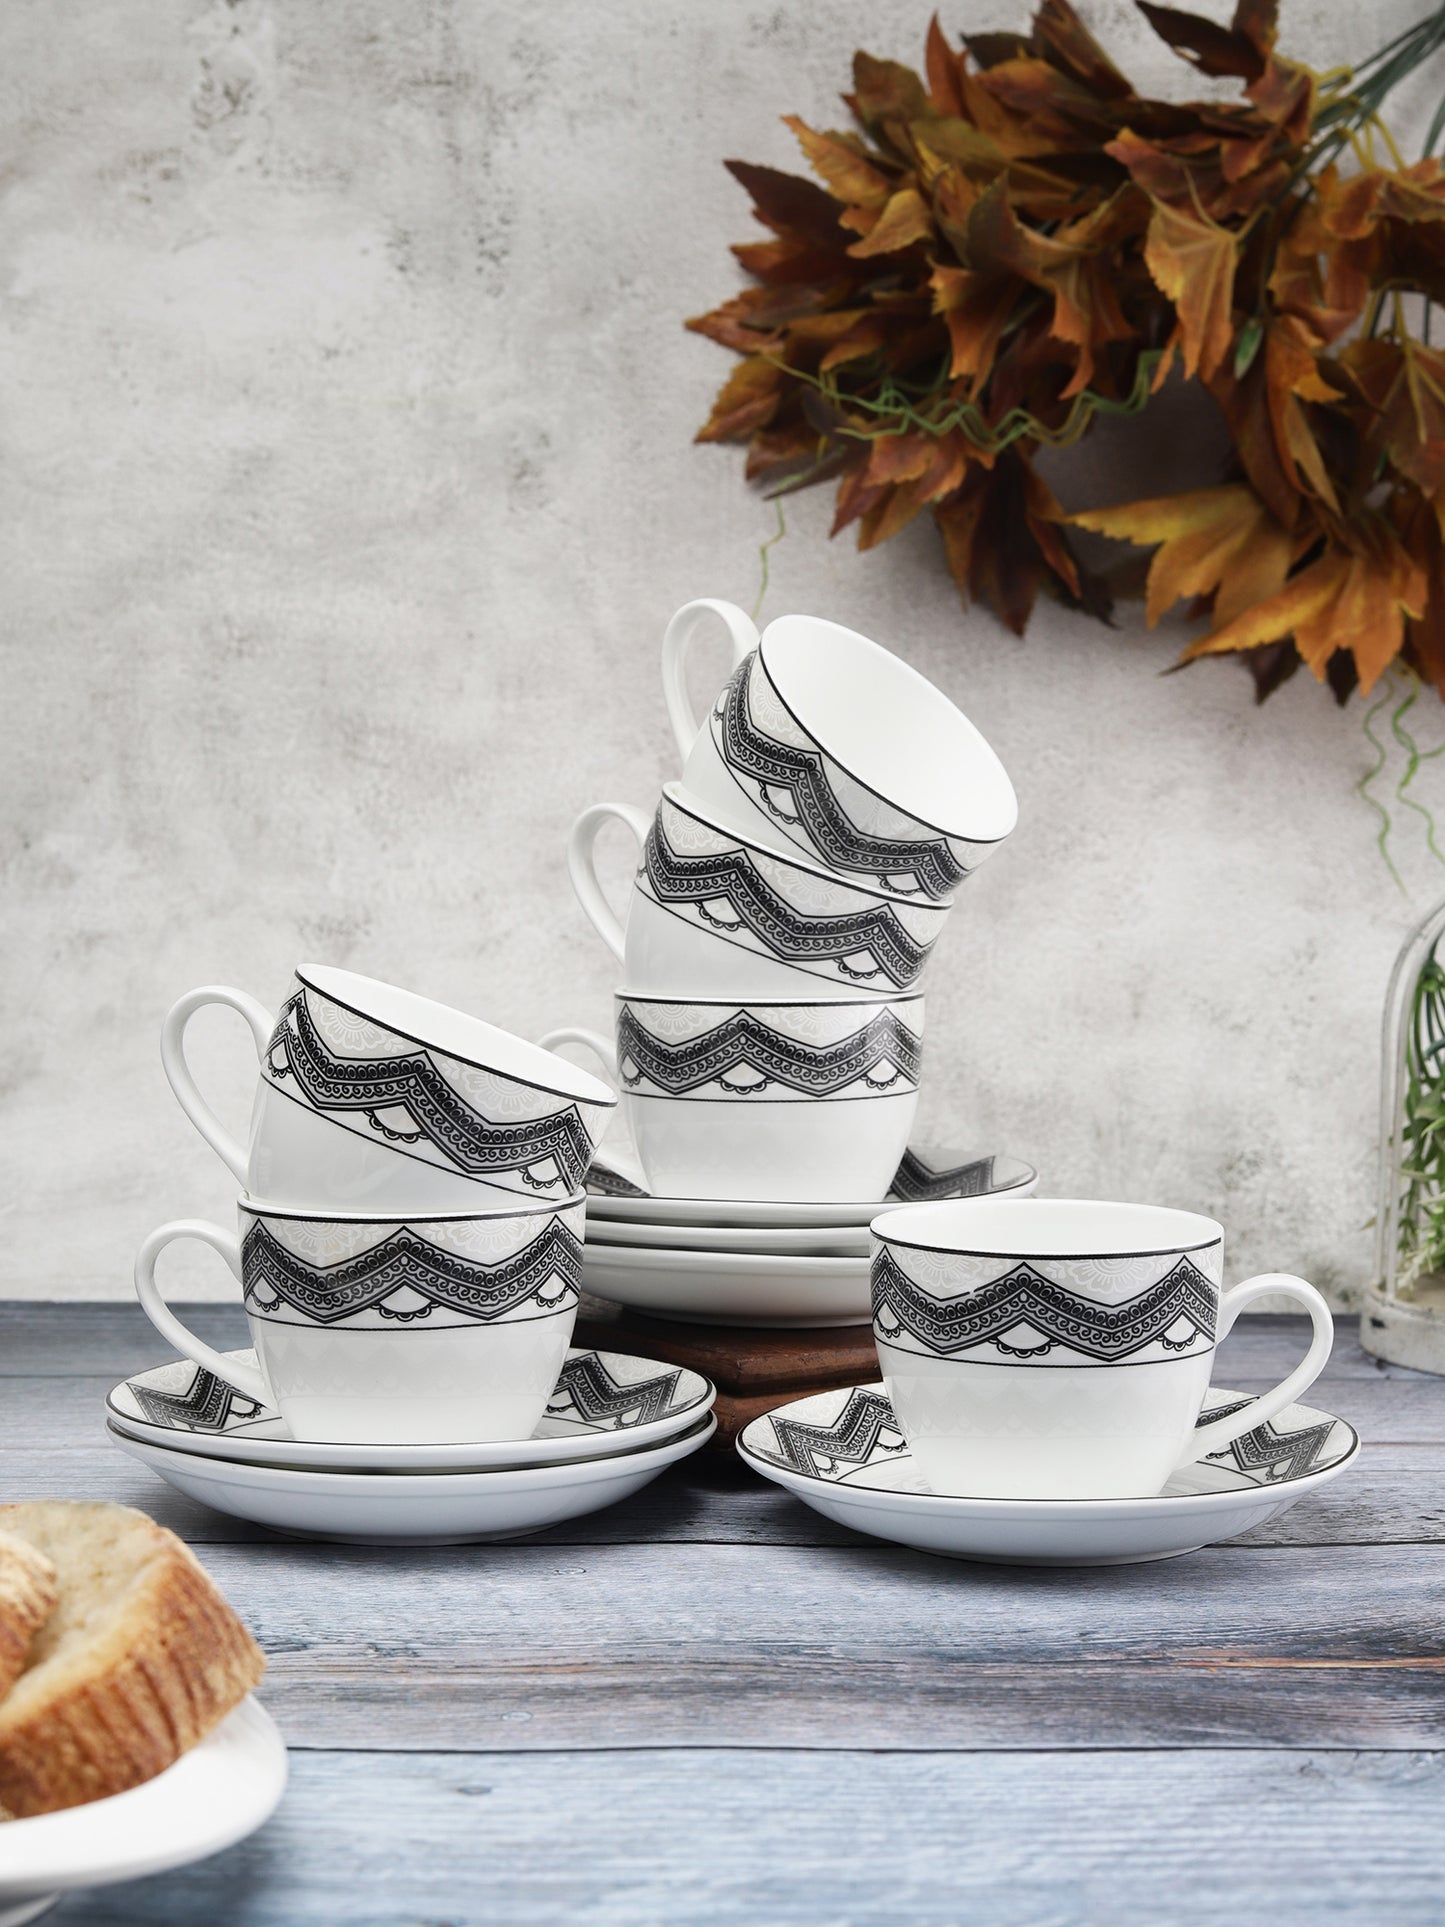 Cream Super Cup & Saucer, 210ml, Sets of 12 (6+6) (S344) - Clay Craft India